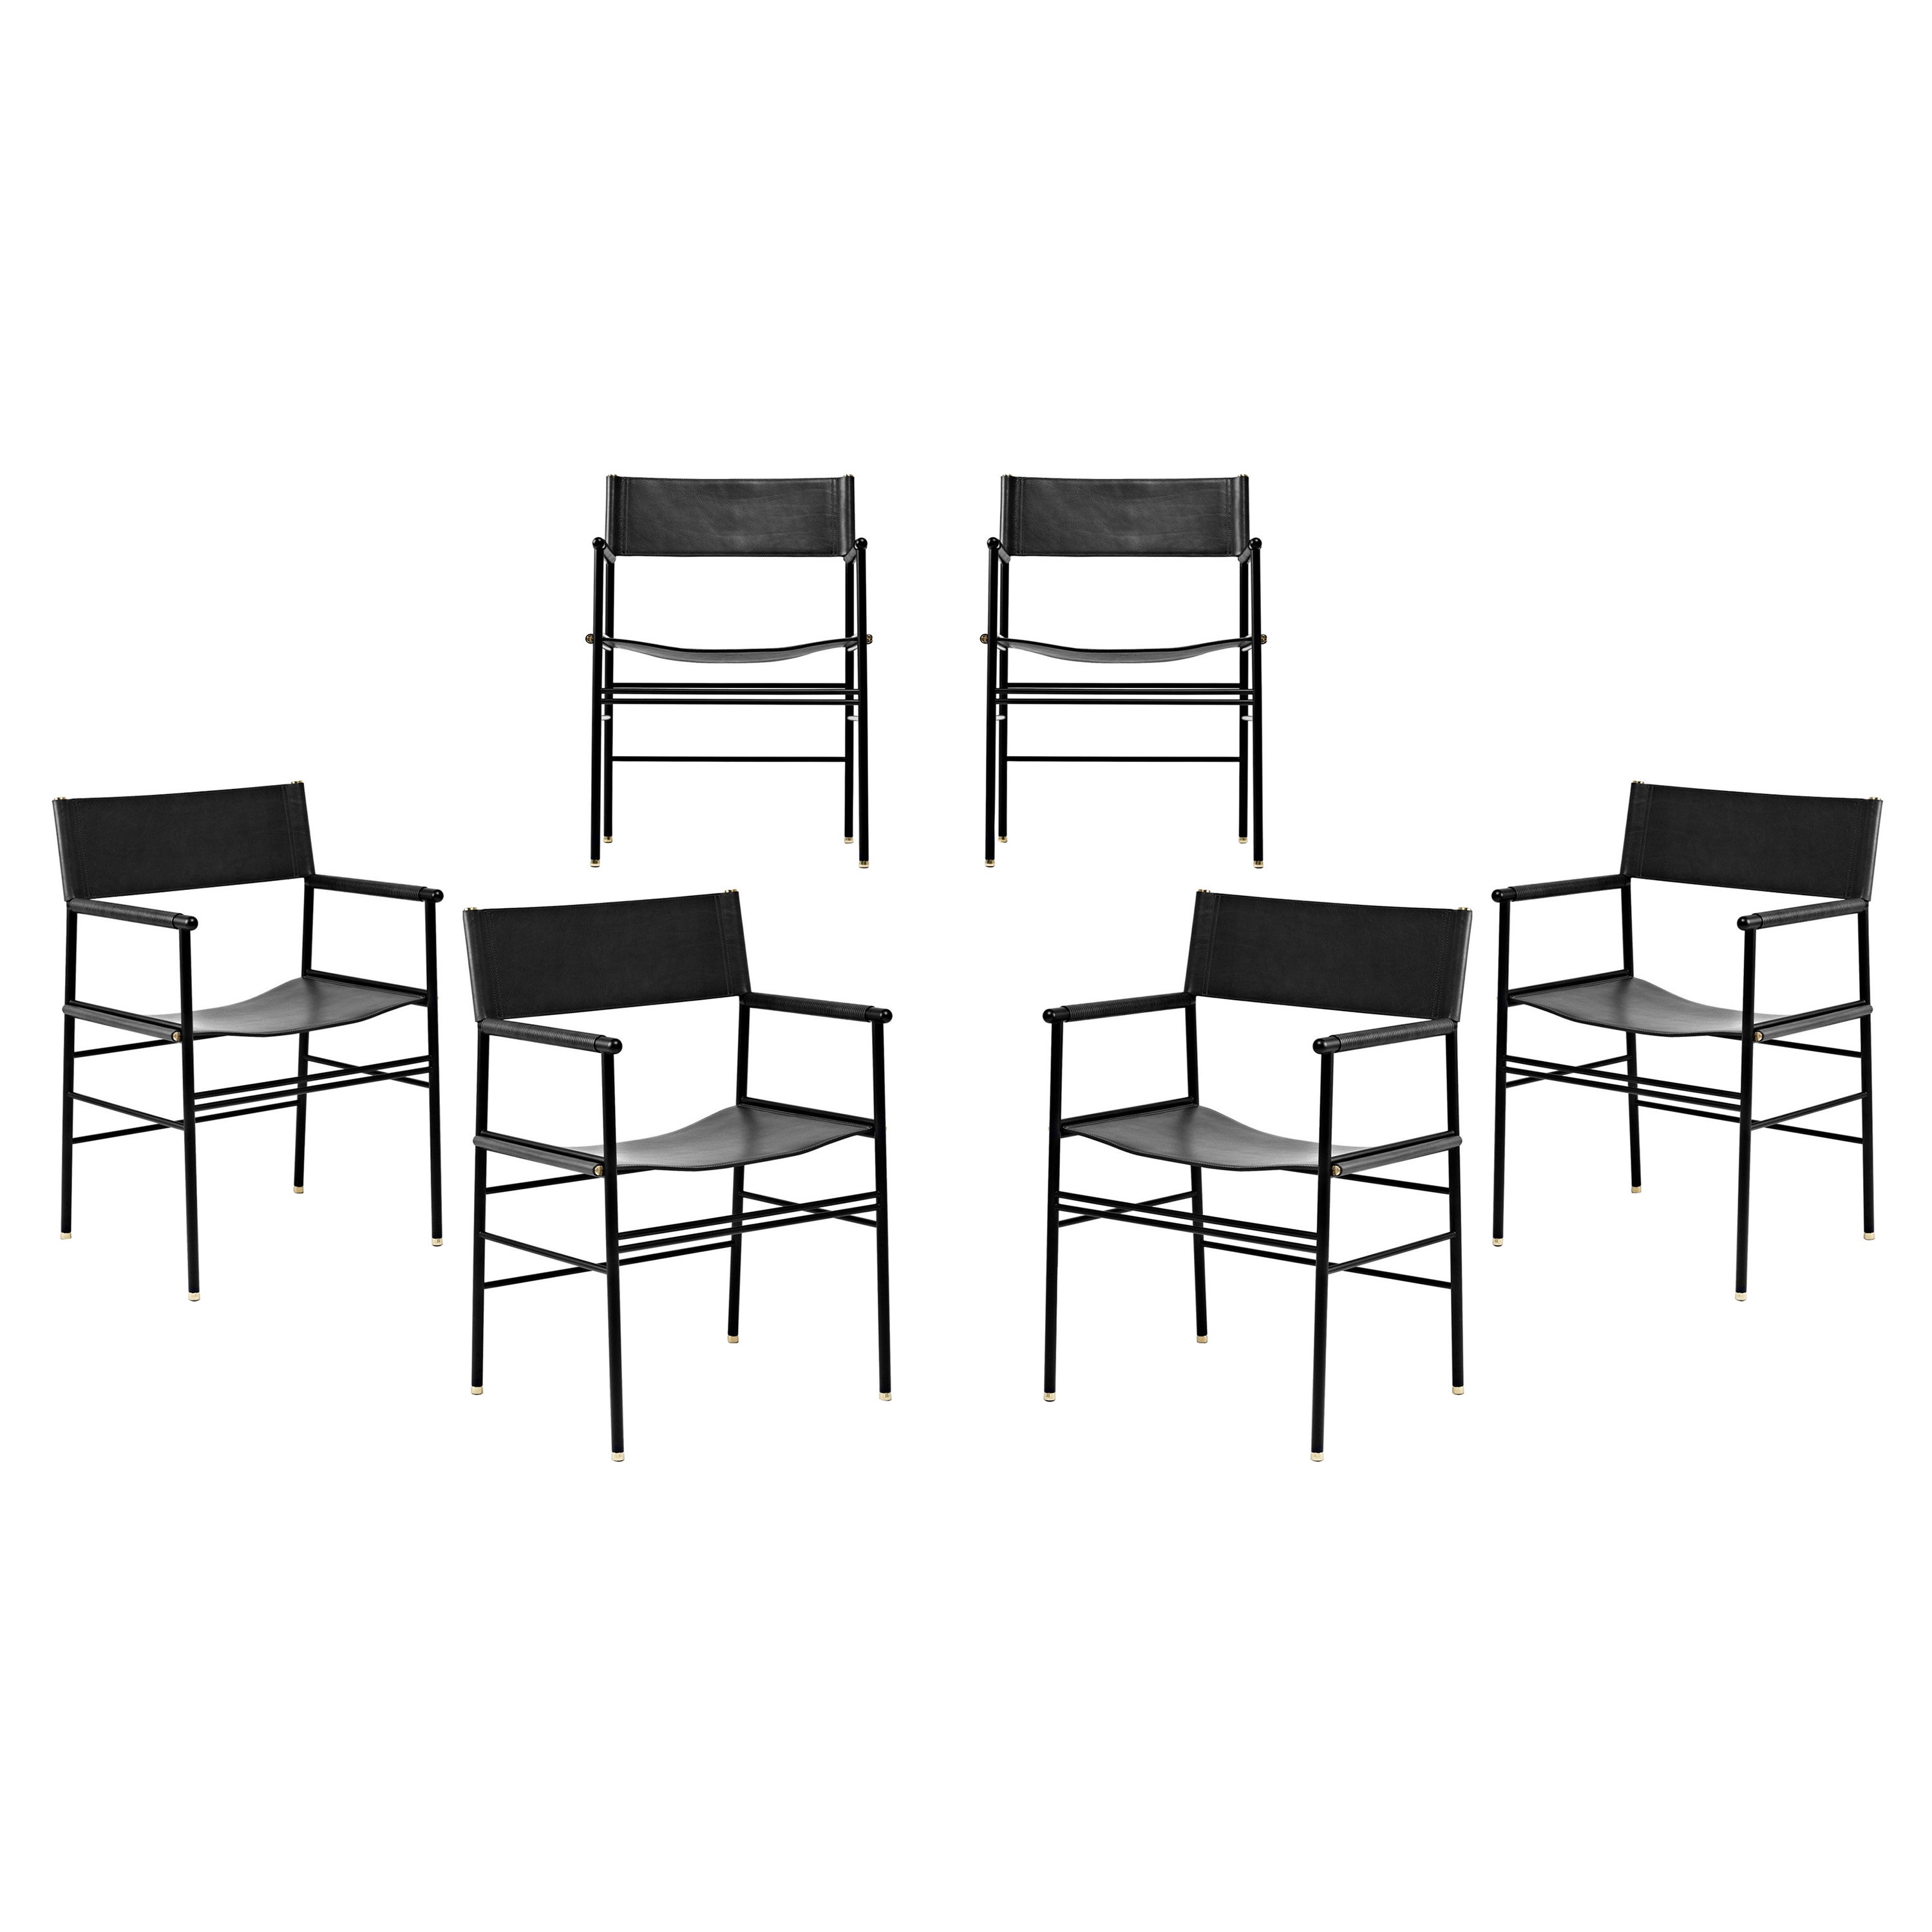 Set of 6 Classic Timeless Contemporary Armchair Black Leather Black Rubber Metal For Sale